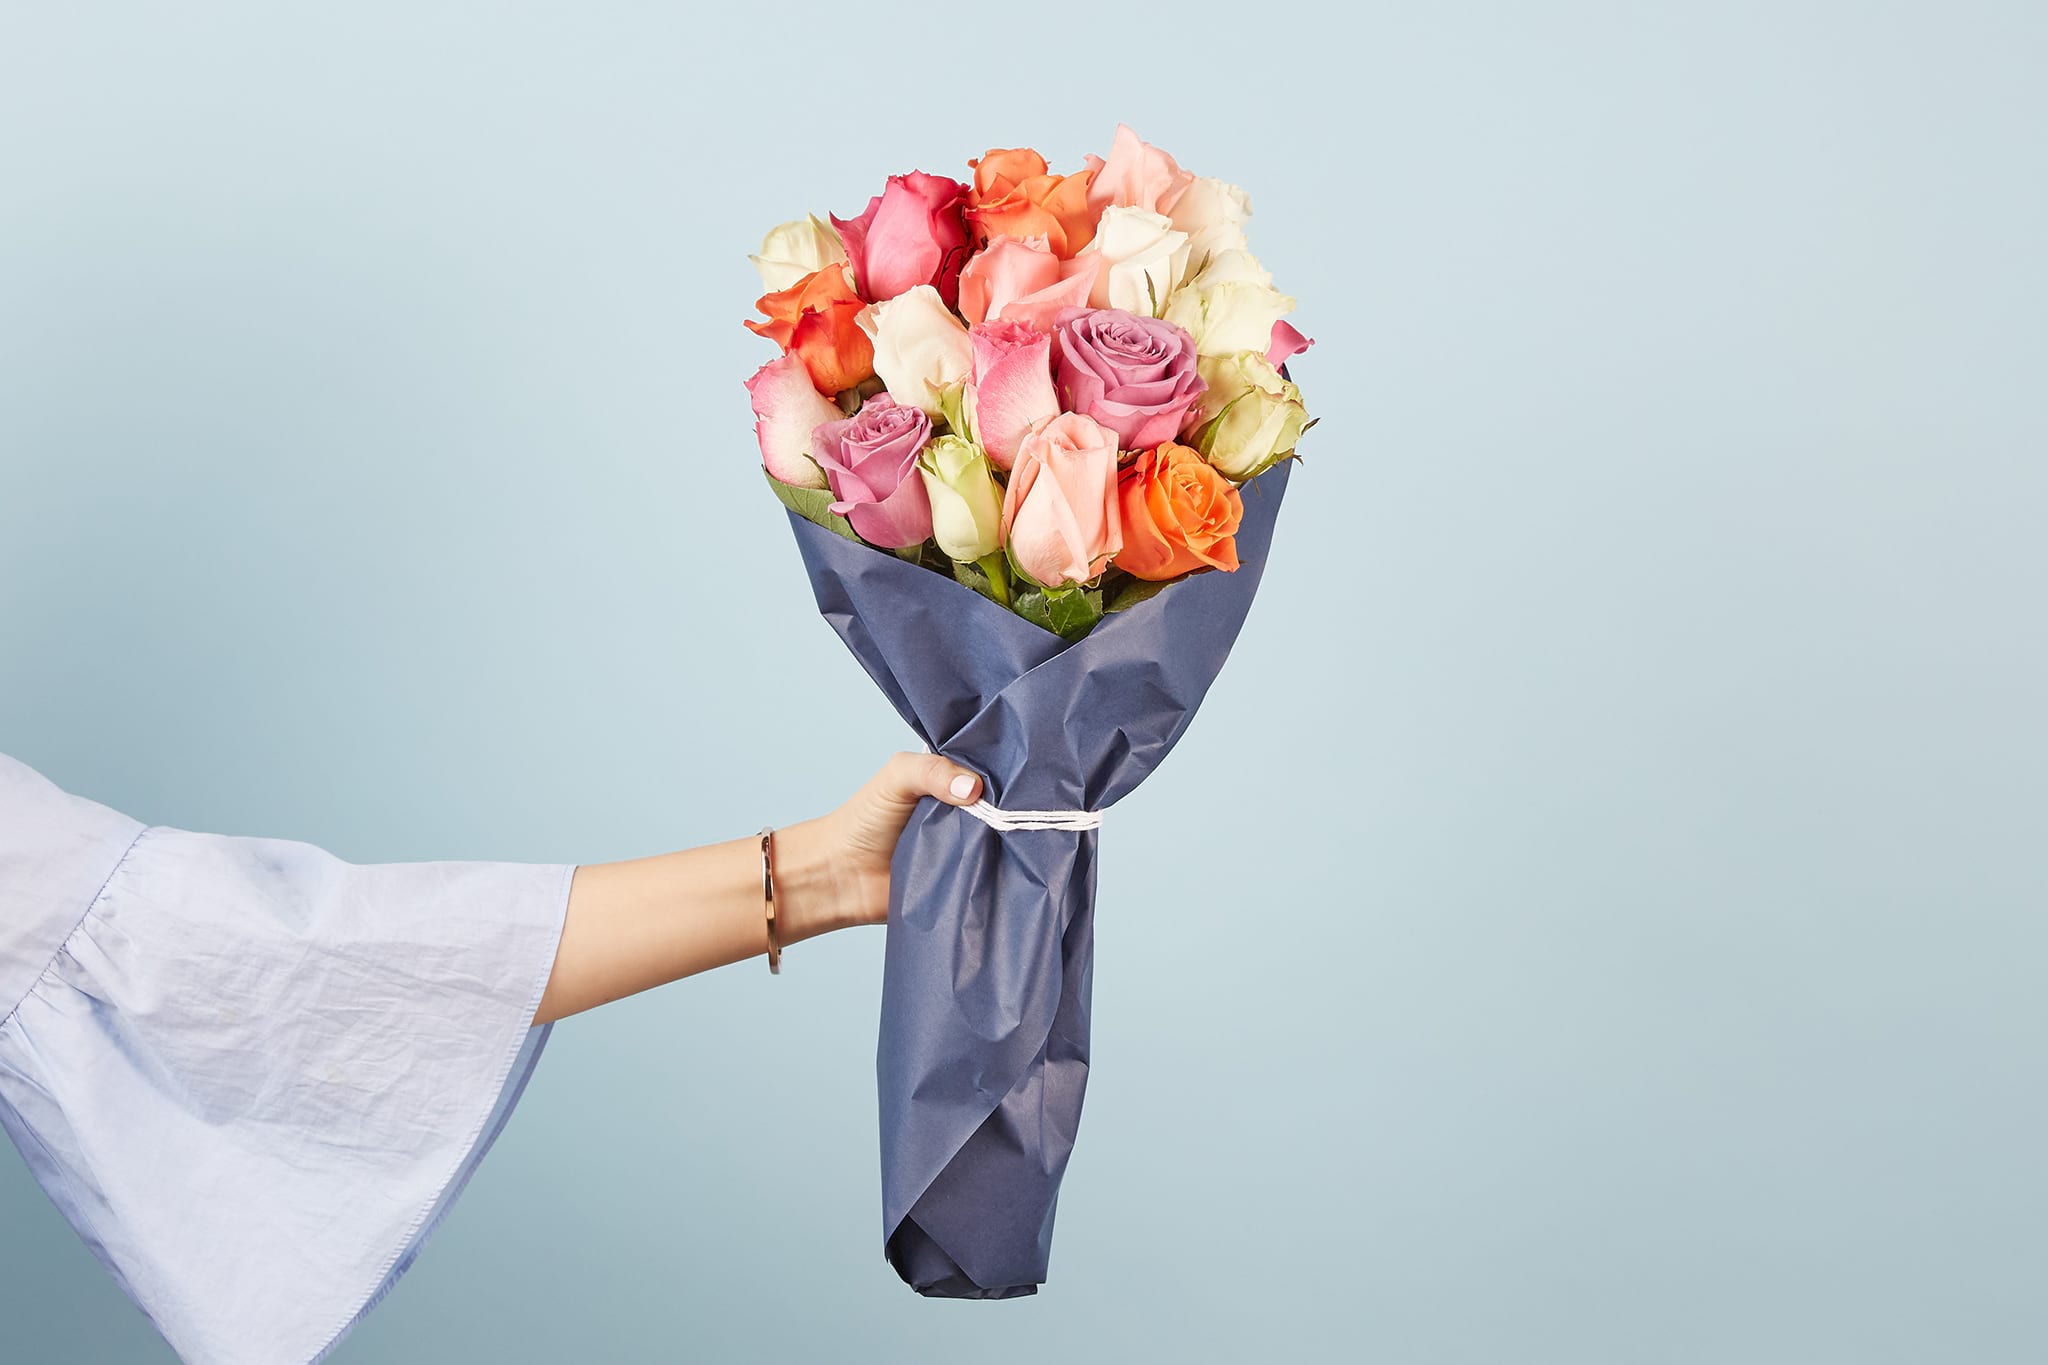 flower delivery brisbane. quality flower delivery